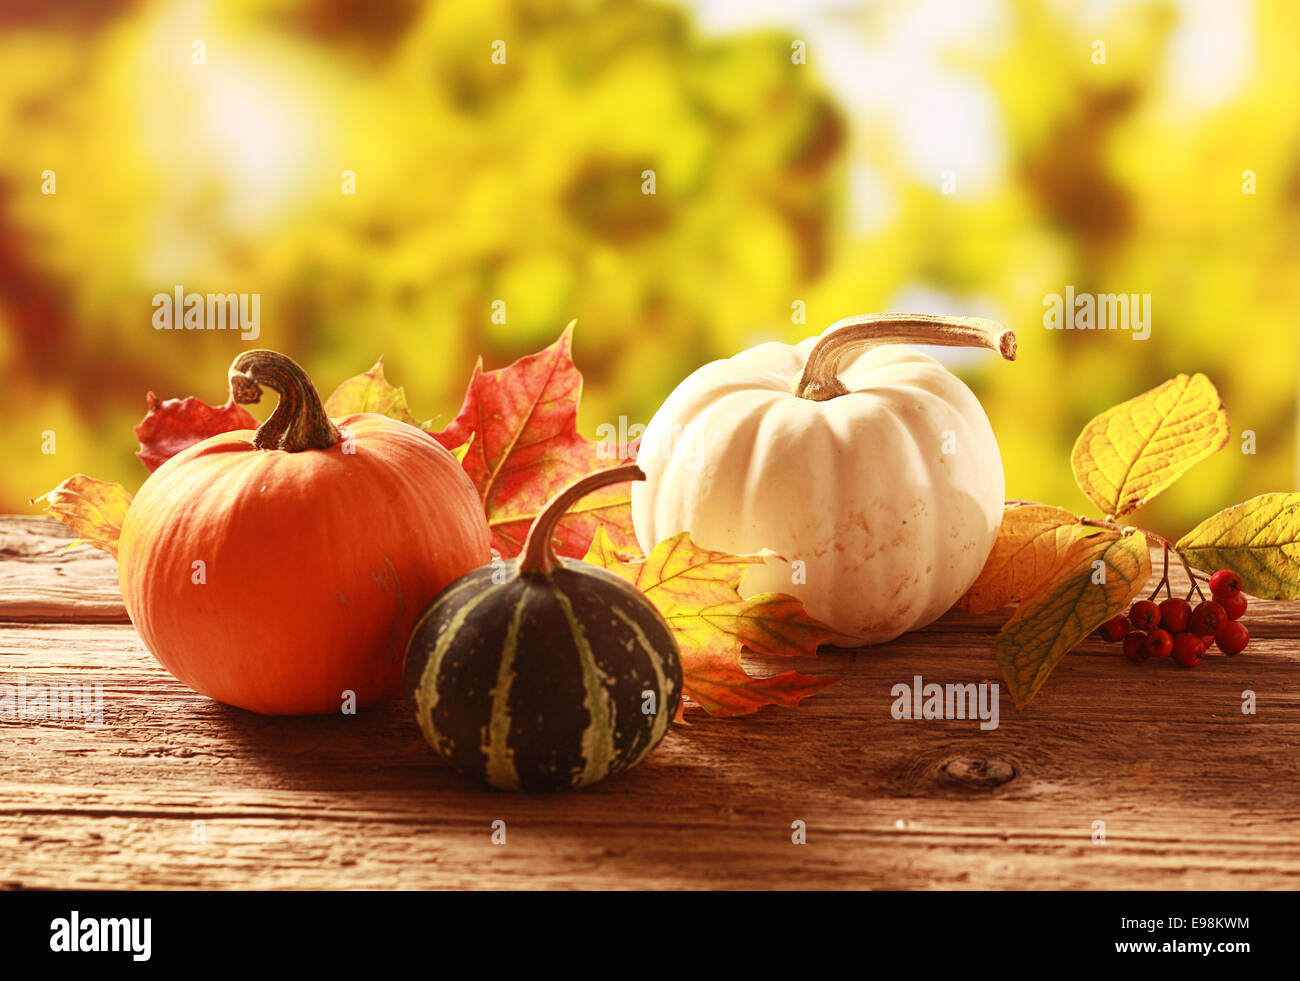 Colorful autumn harvest with an orange, variegated green and white pumpkin and squash amongst colorful fall leaves on a rustic wooden table in a golden autumnal garden with copyspace Stock Photo